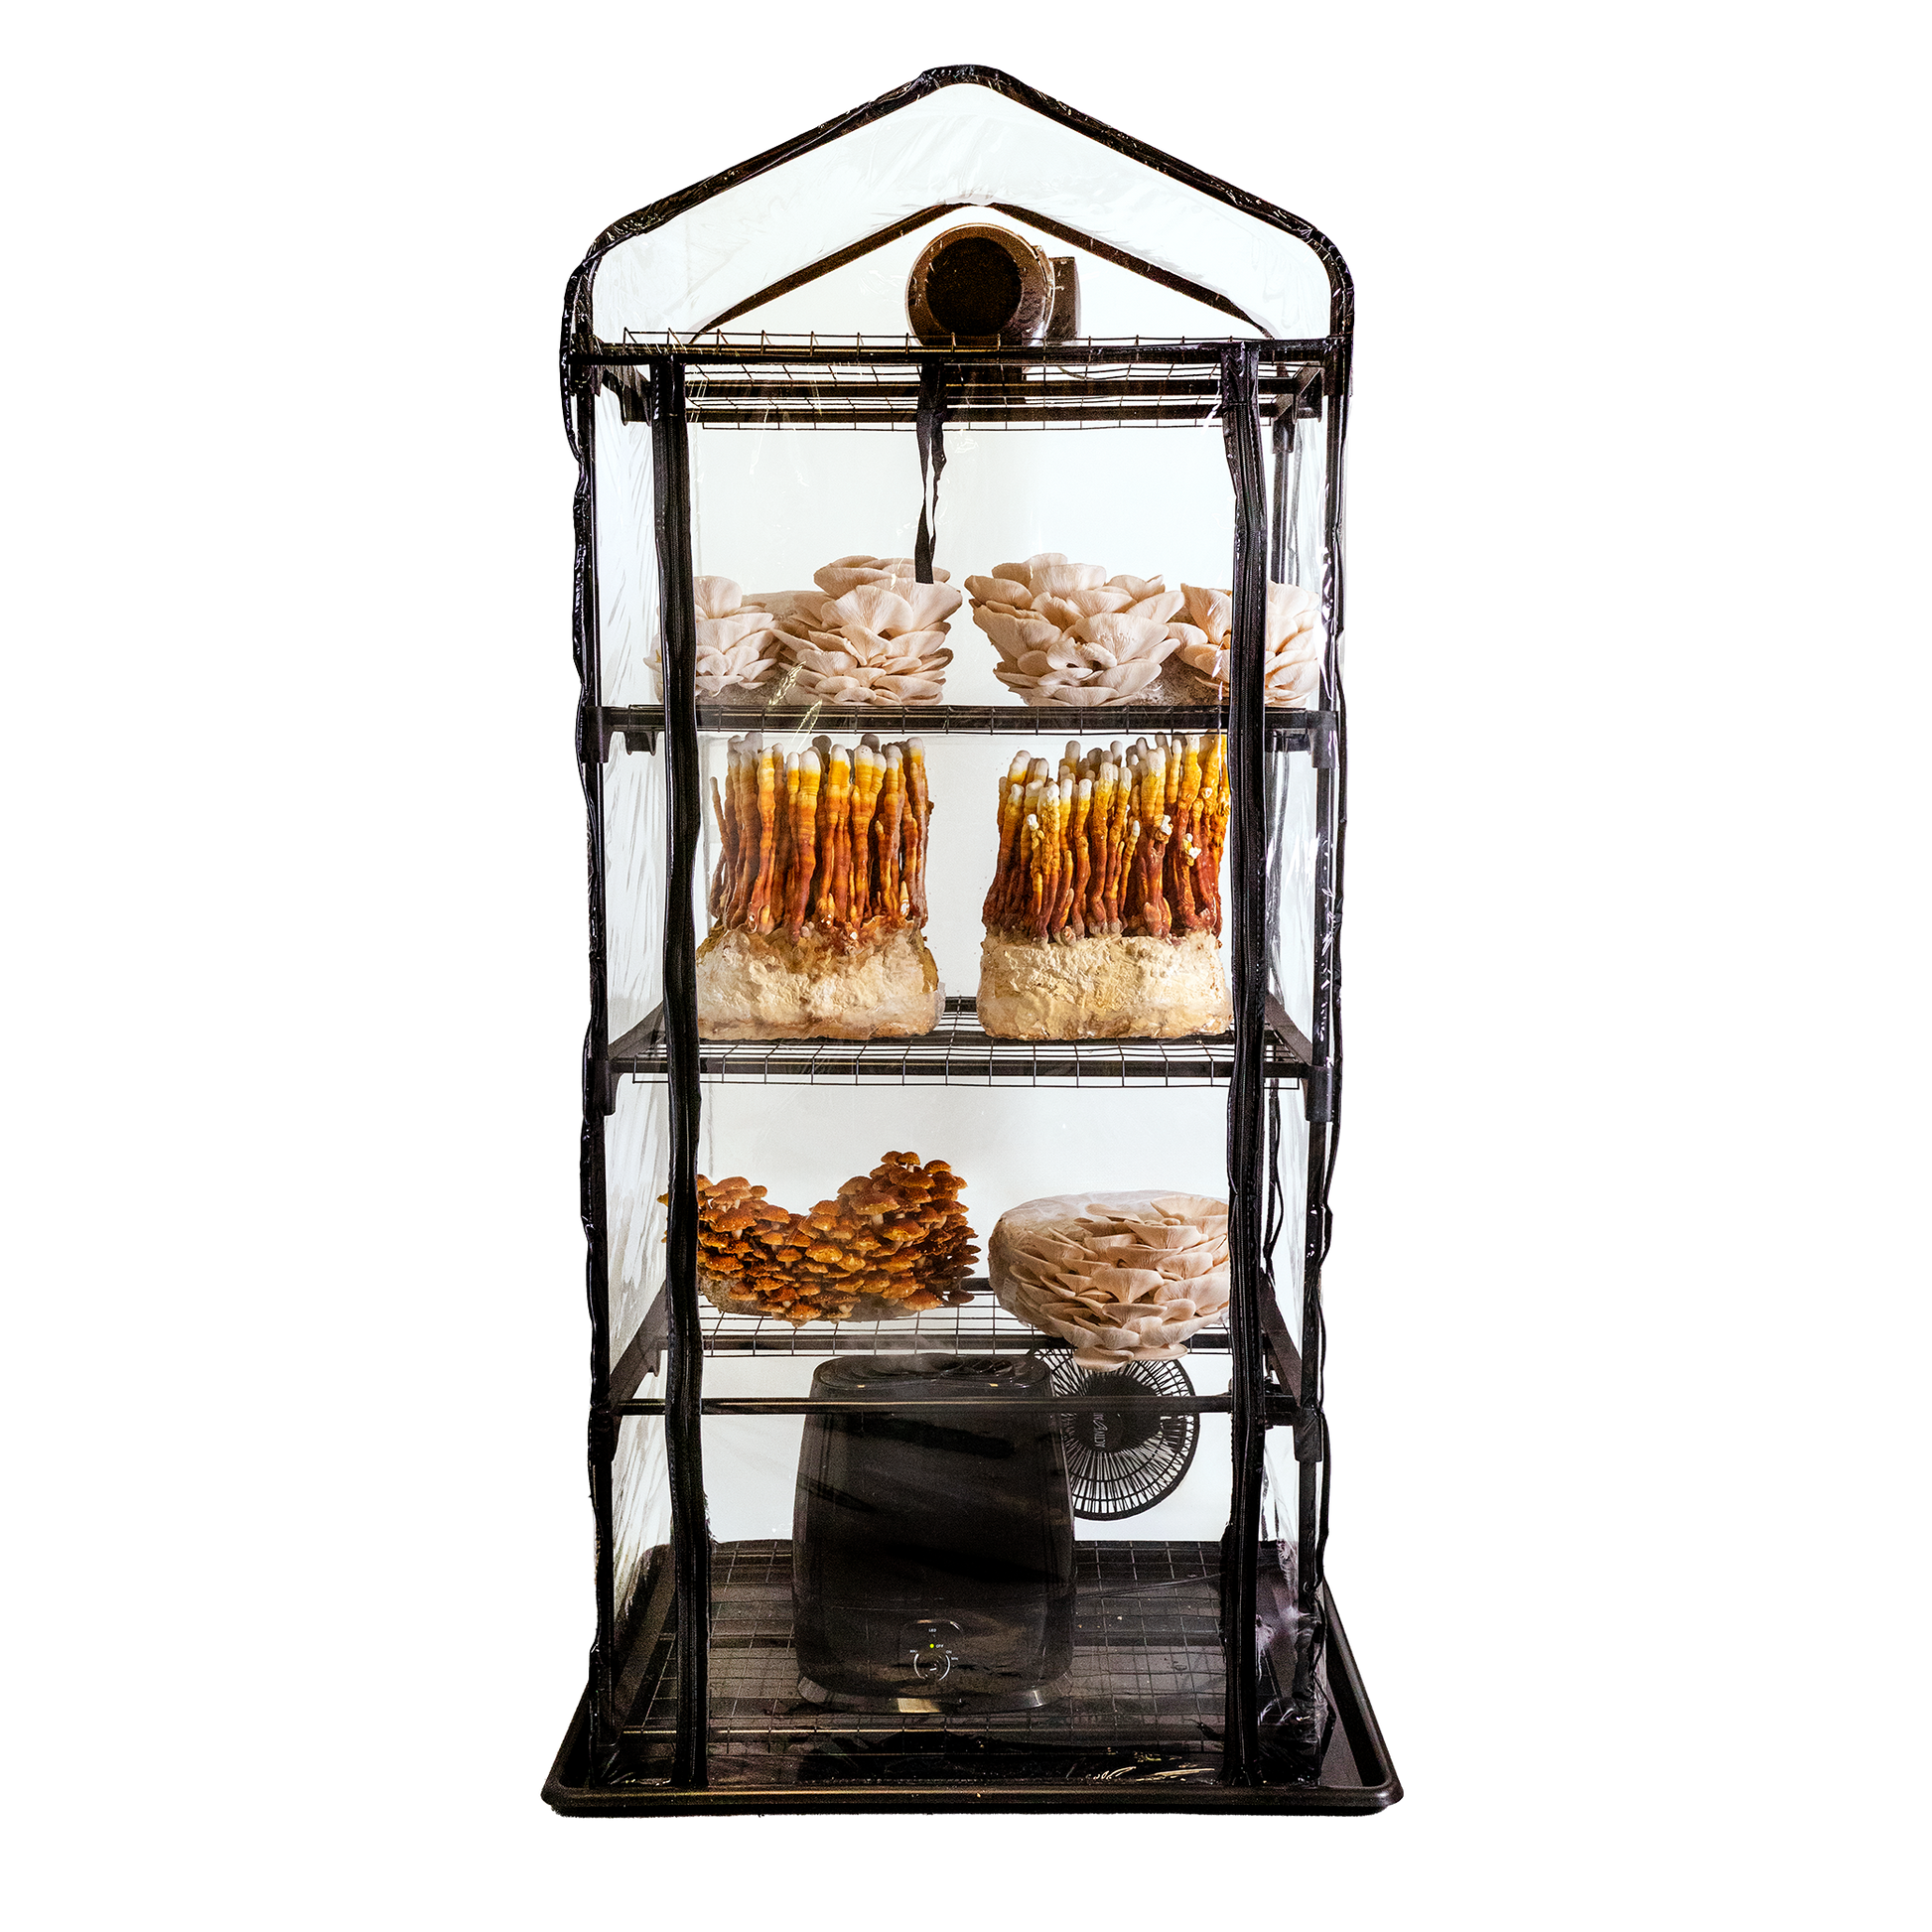 A fully assembled grow tent with transparent walls displaying multiple shelves with various stages of oyster mushroom growth.